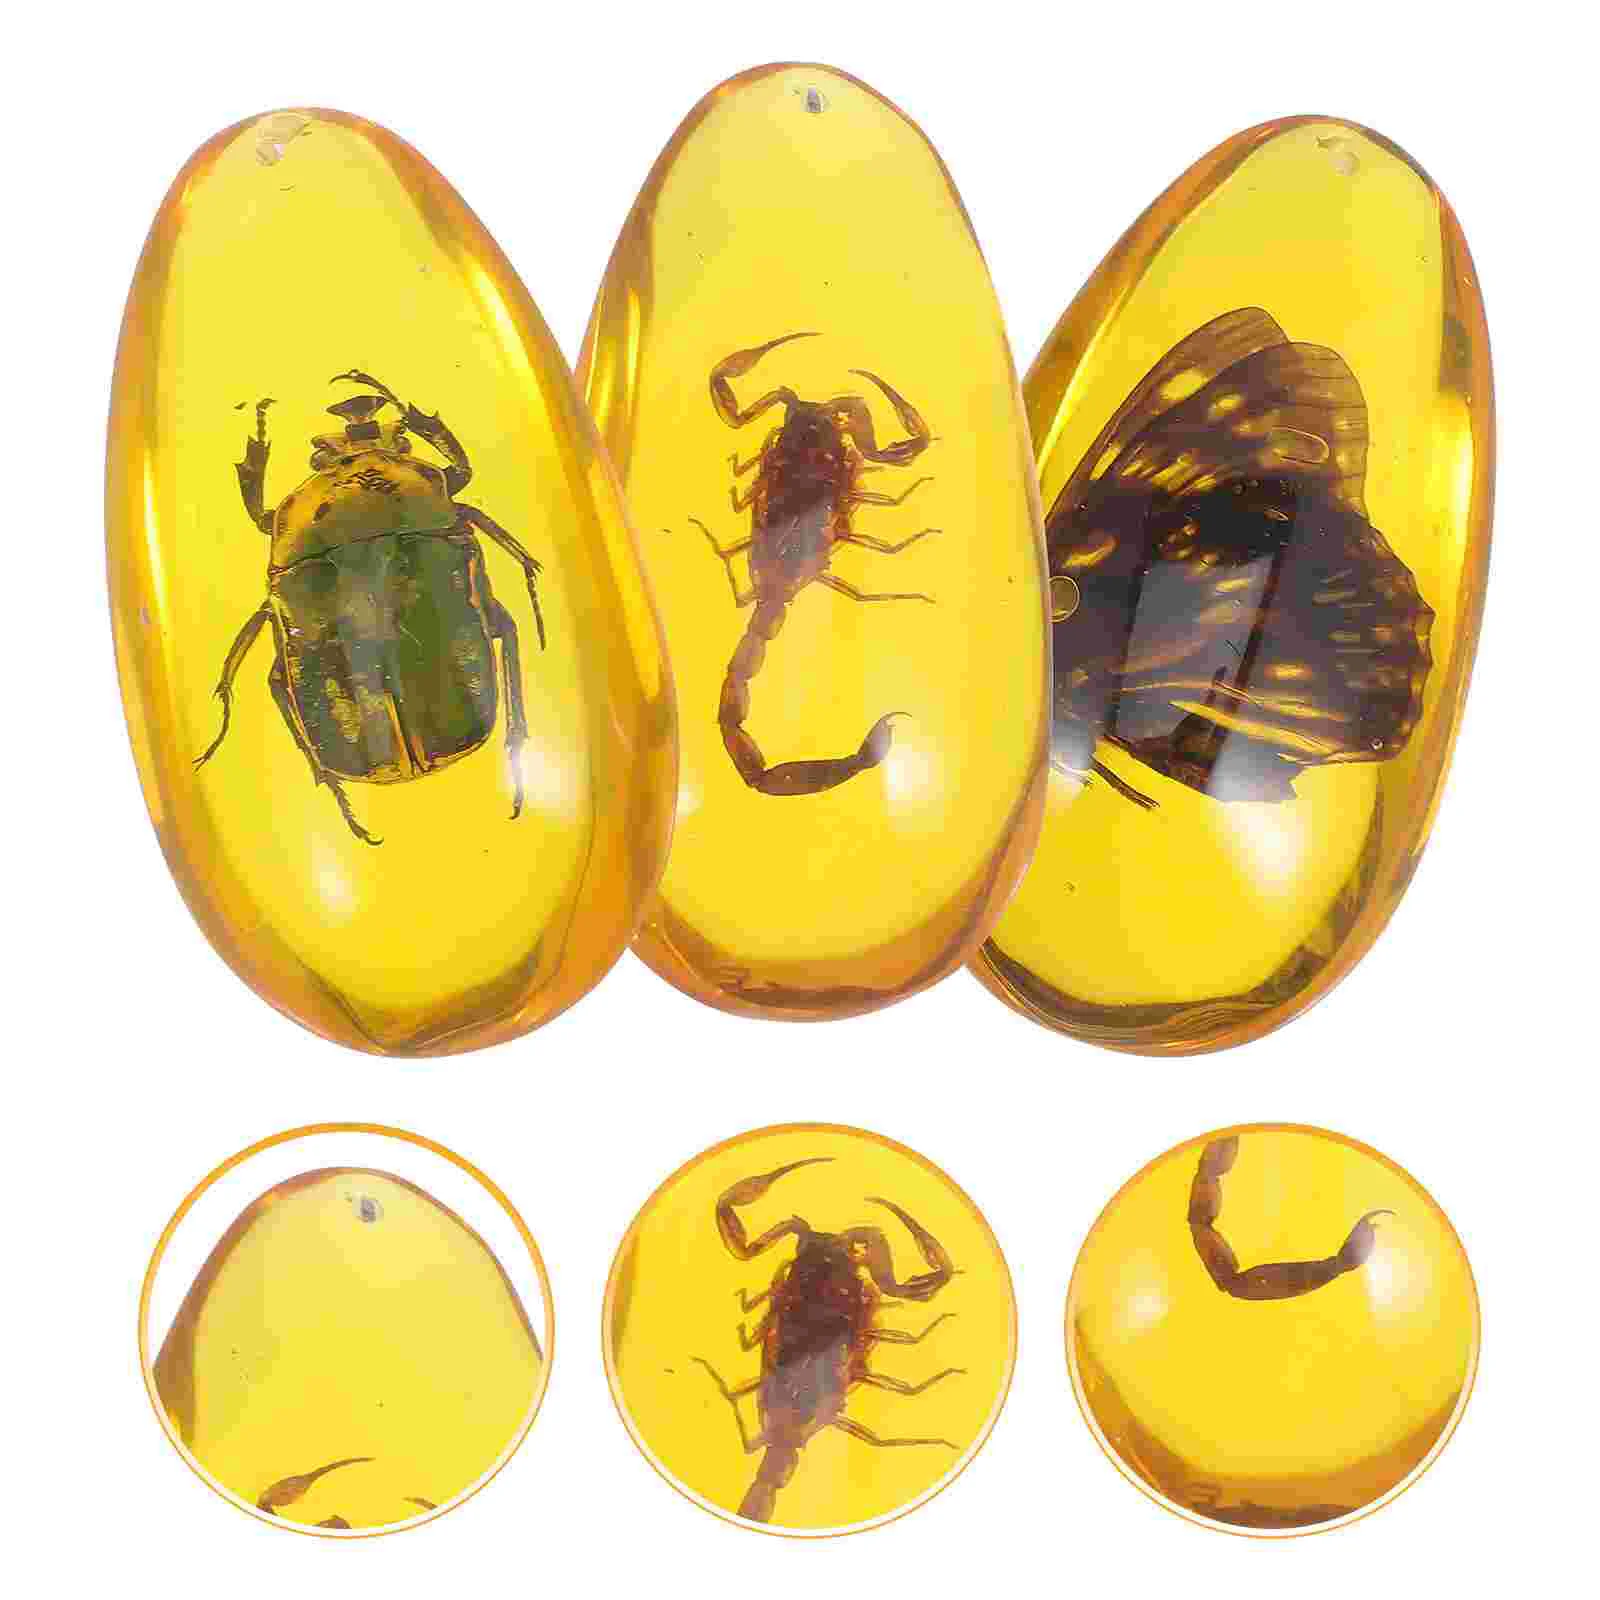 

3Pcs Resin Insects Amber Resin Crafts Insect Specimen Amber Decorative Bug Amber Kids Cognitive Toy